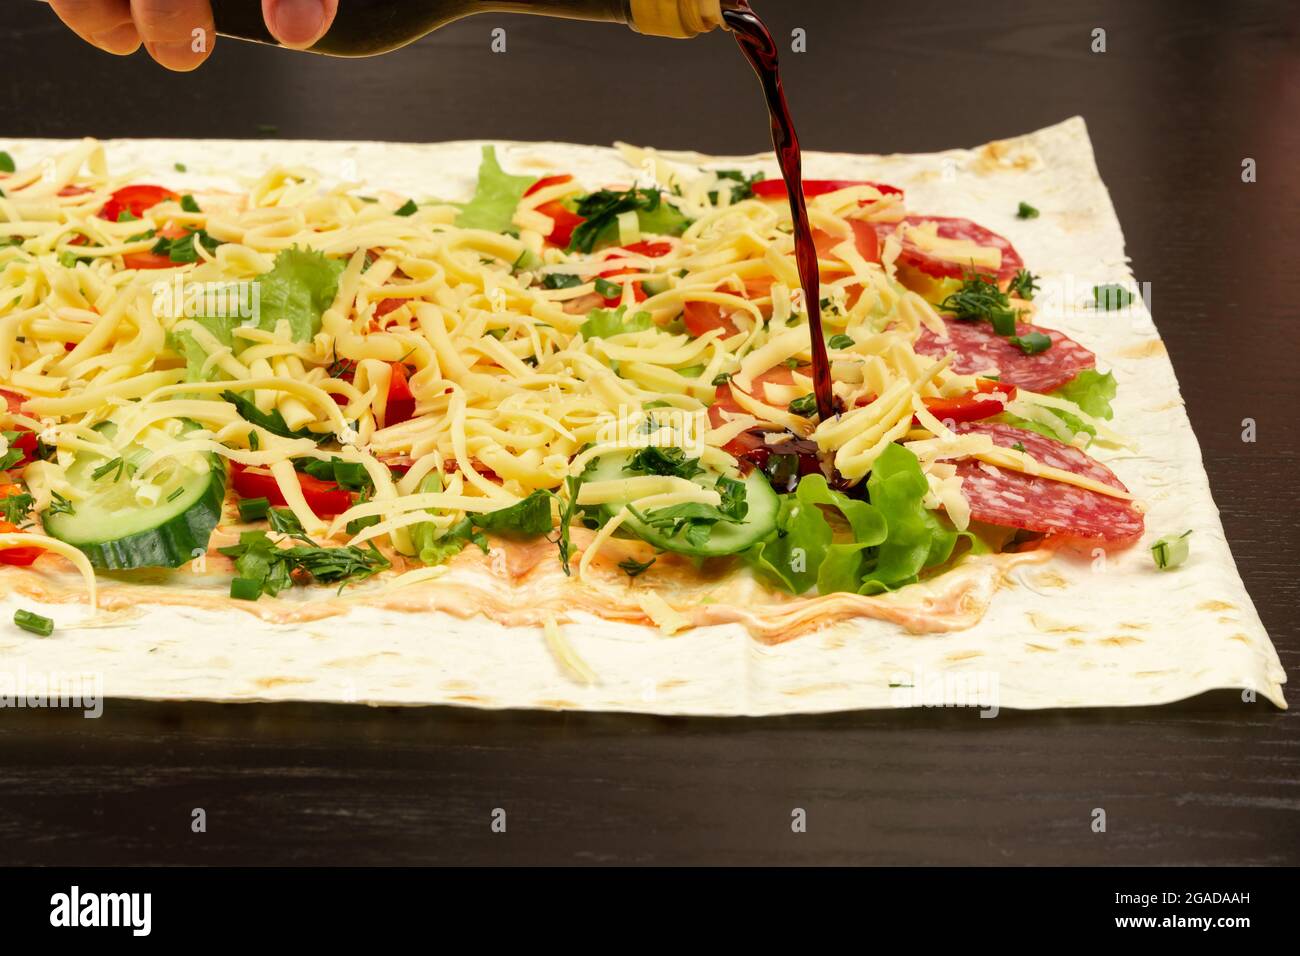 soy sauce is poured from the bottle on the unwrapped shawarma with fresh herbs, cheese and vegetables on the background of a black wooden table Stock Photo